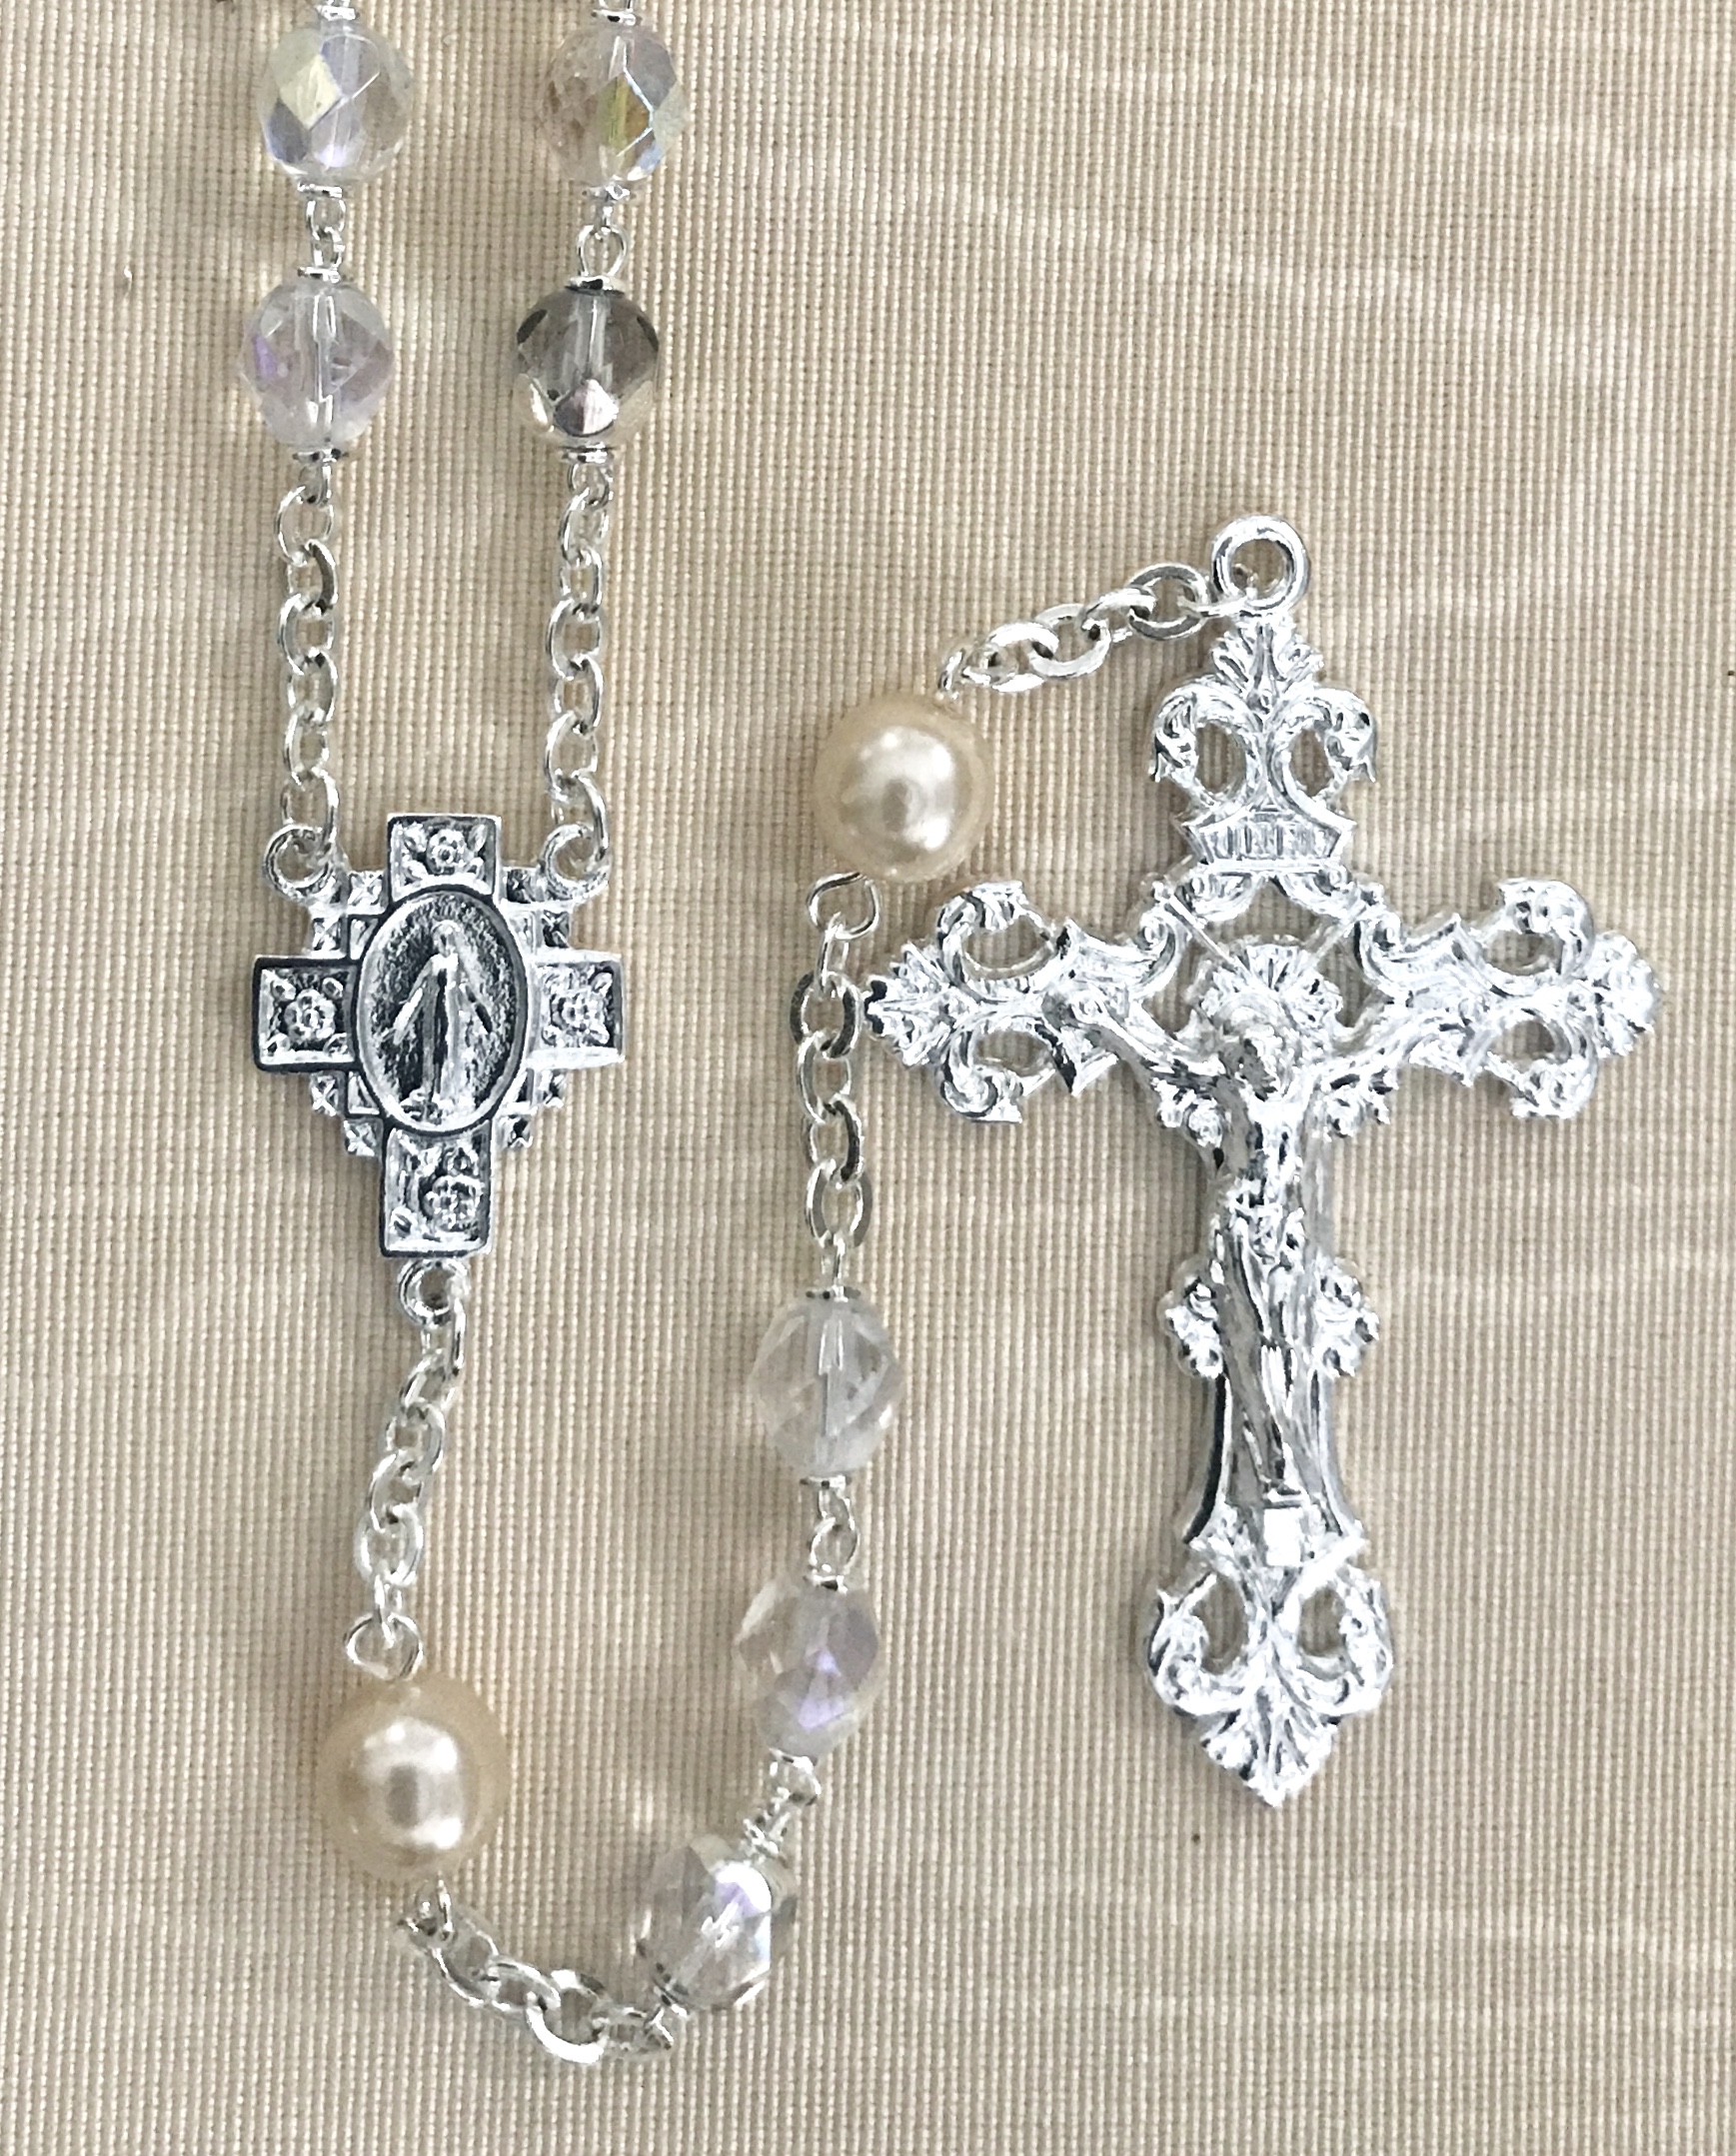 7mm CRYSTAL AB WITH TOPAZ PEARL OUR FATHER BEADS STERLING SILVER PLATED ROSARY GIFT BOXED